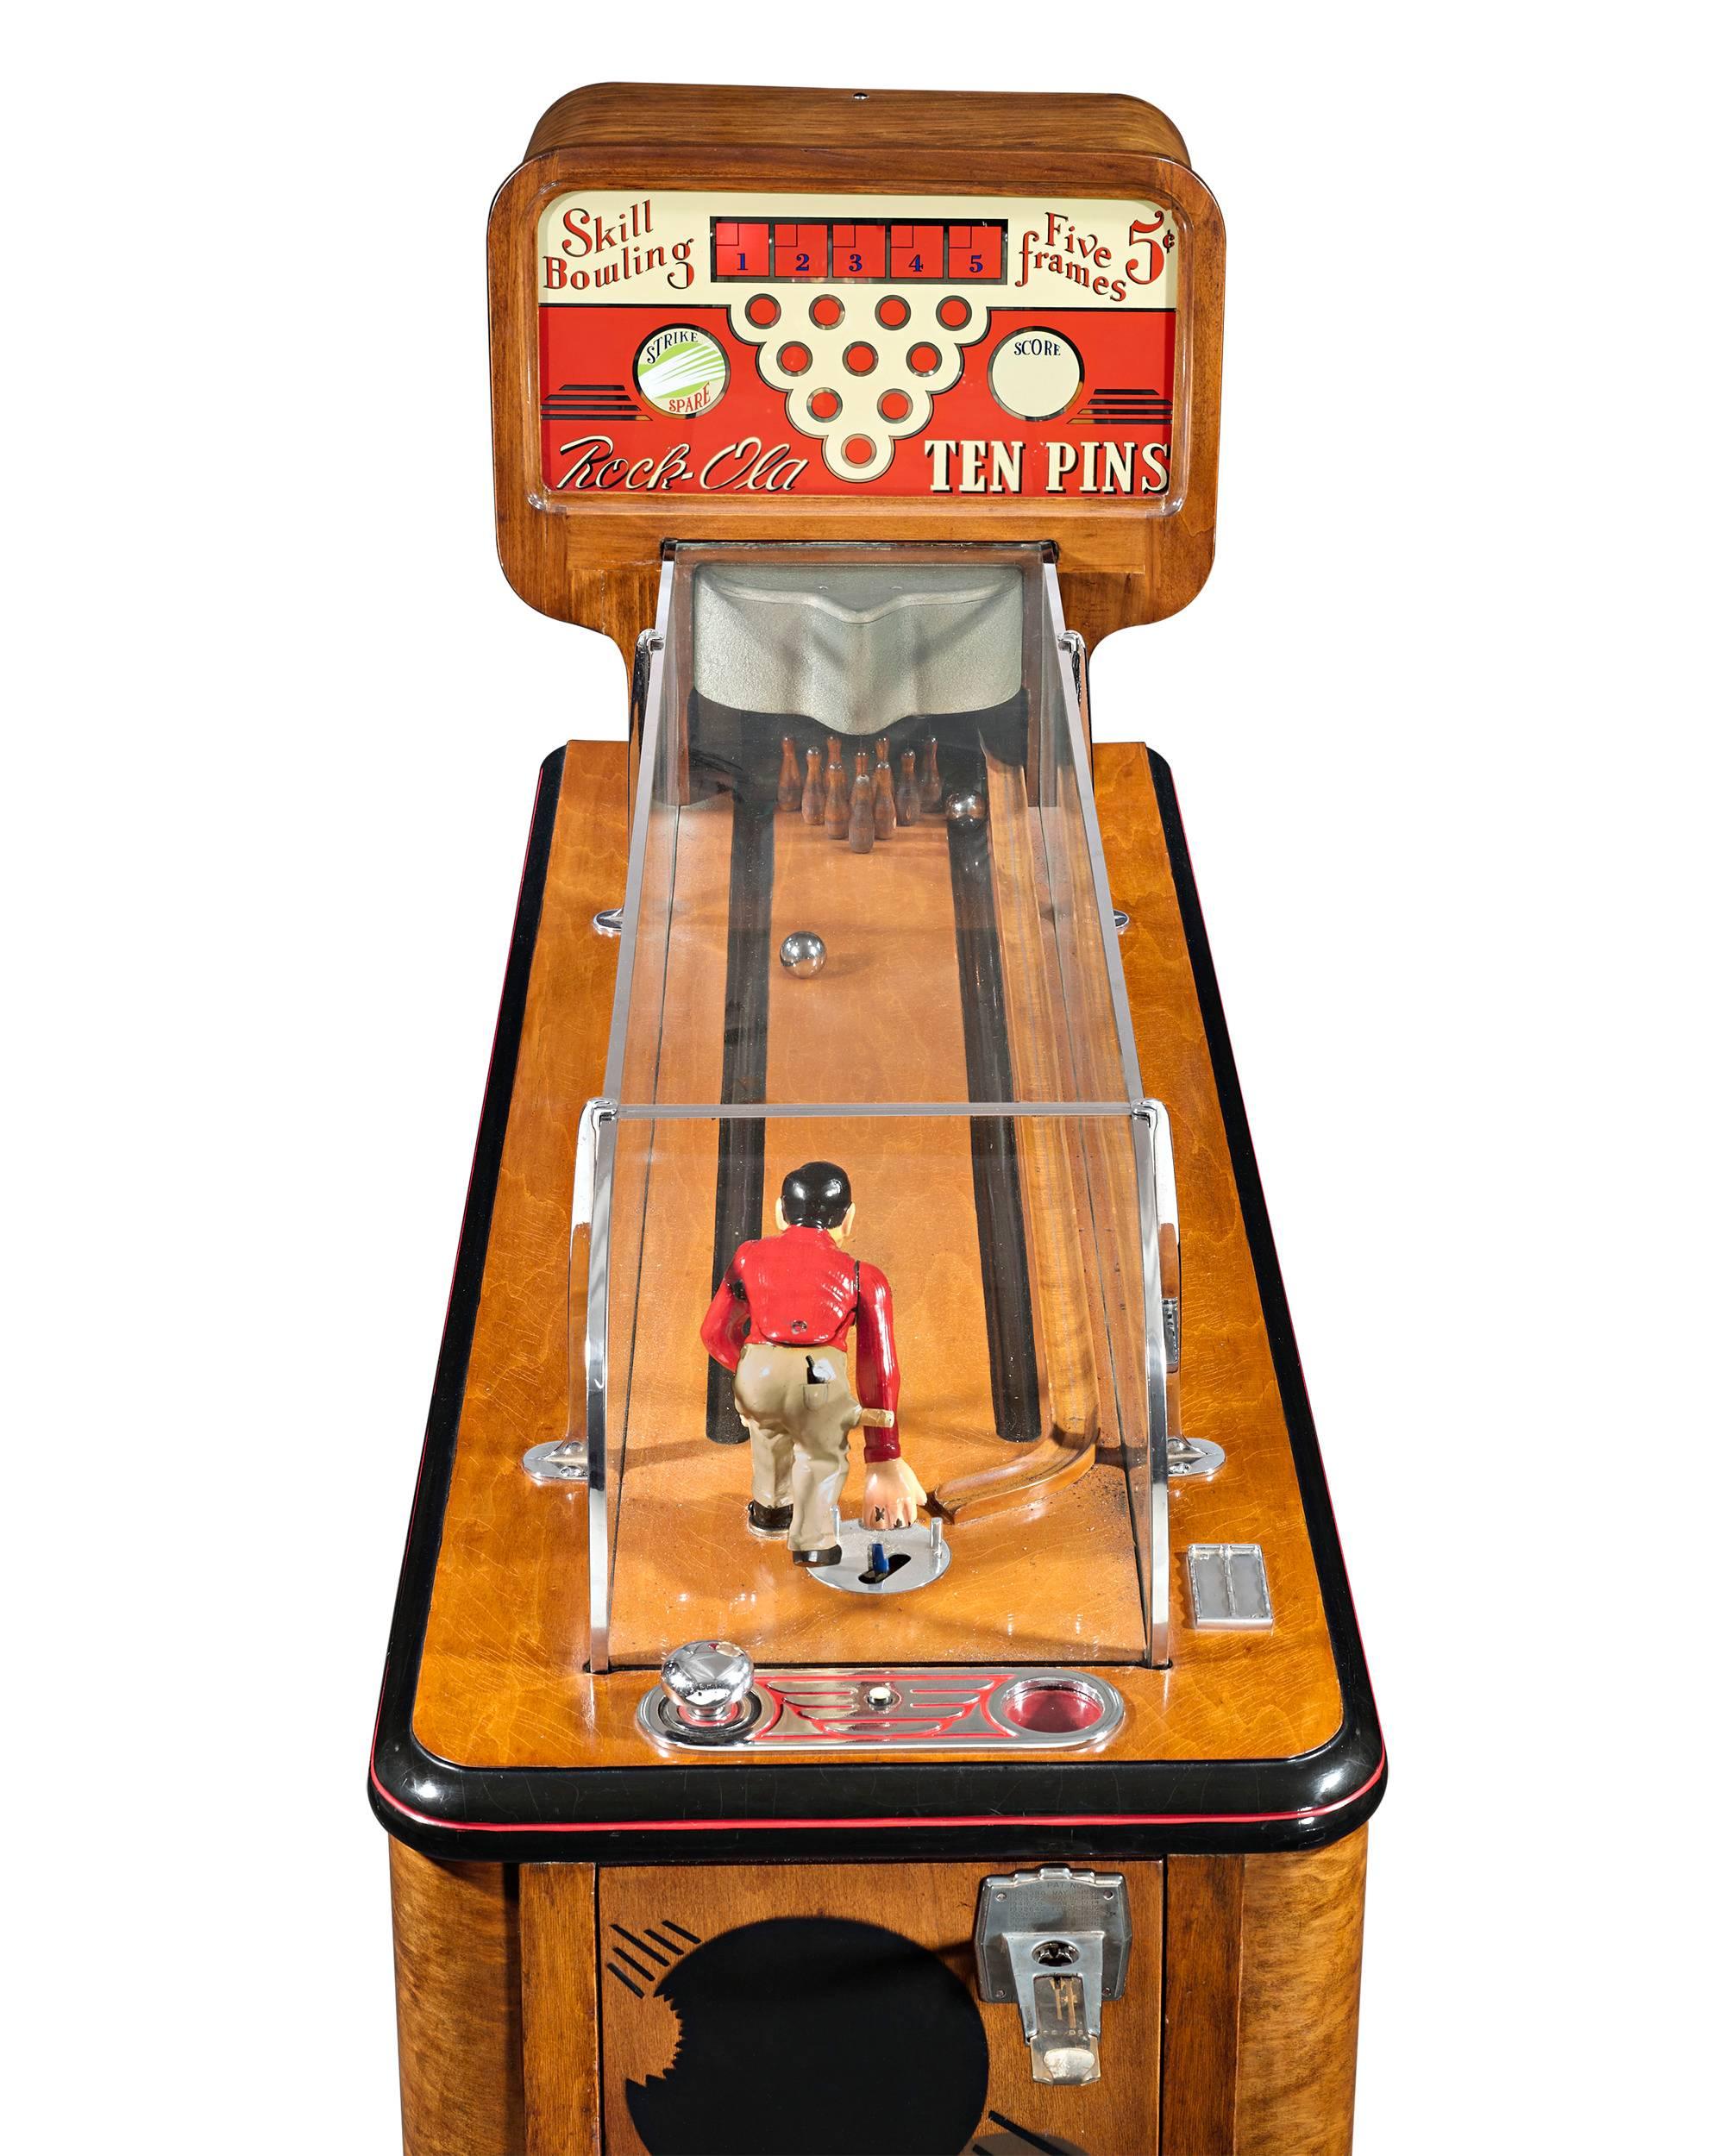 This exceptionally rare vintage ten pins machine was among the most popular arcade games ever produced by the Rock-Ola Manufacturing Corporation. Known as a “mannequin” model, this machine allows a customer to control the miniature molded figure